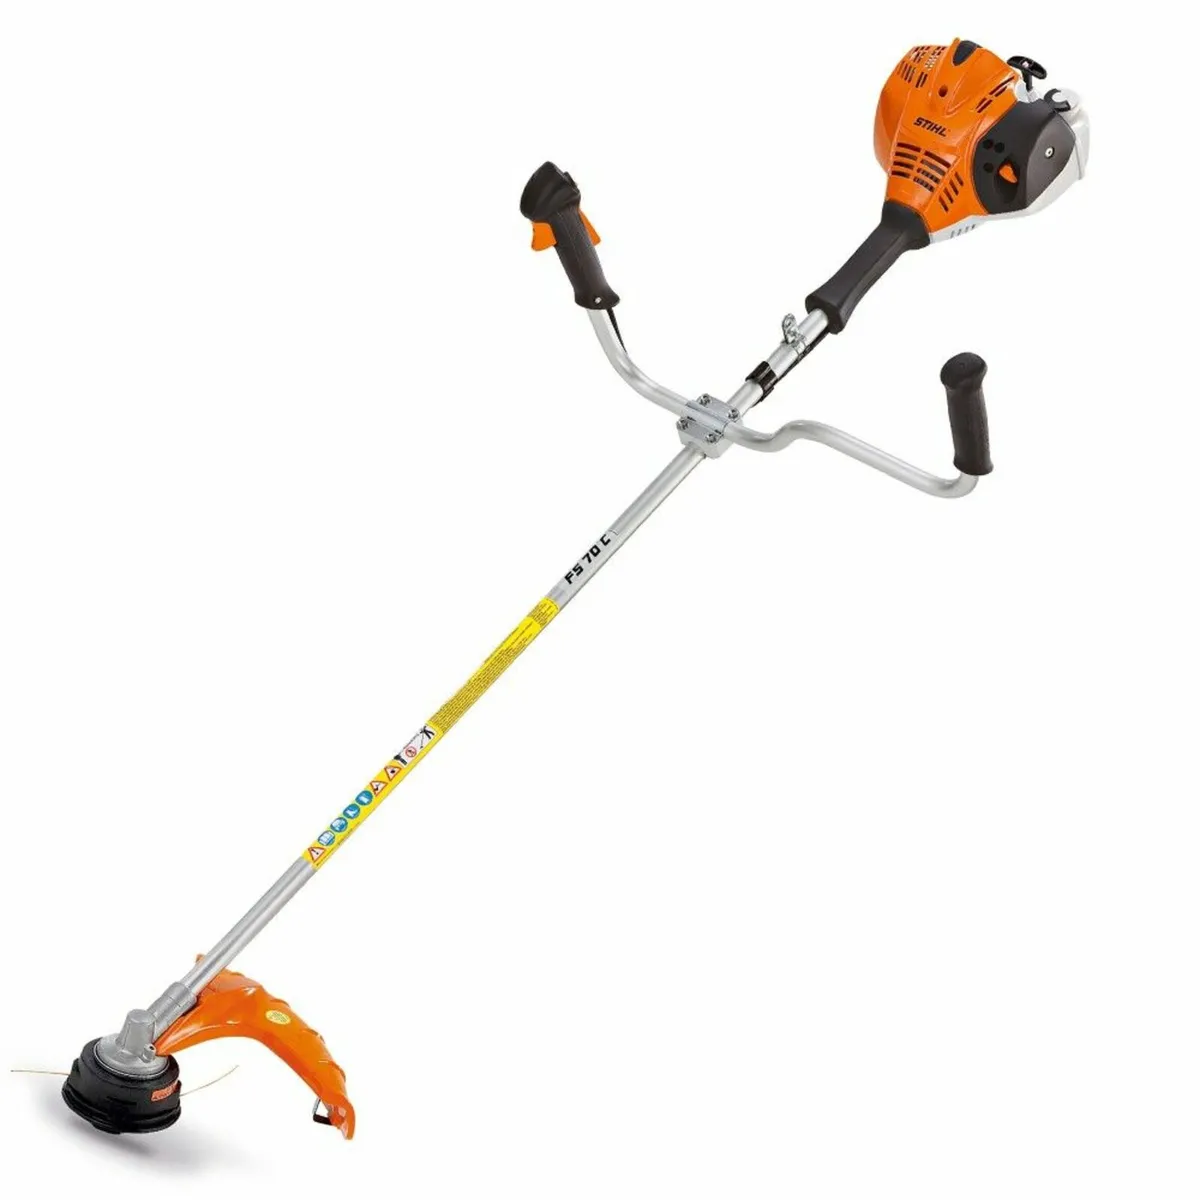 Used Strimmers & Hedgetrimmers - STIHL, Honda, etc